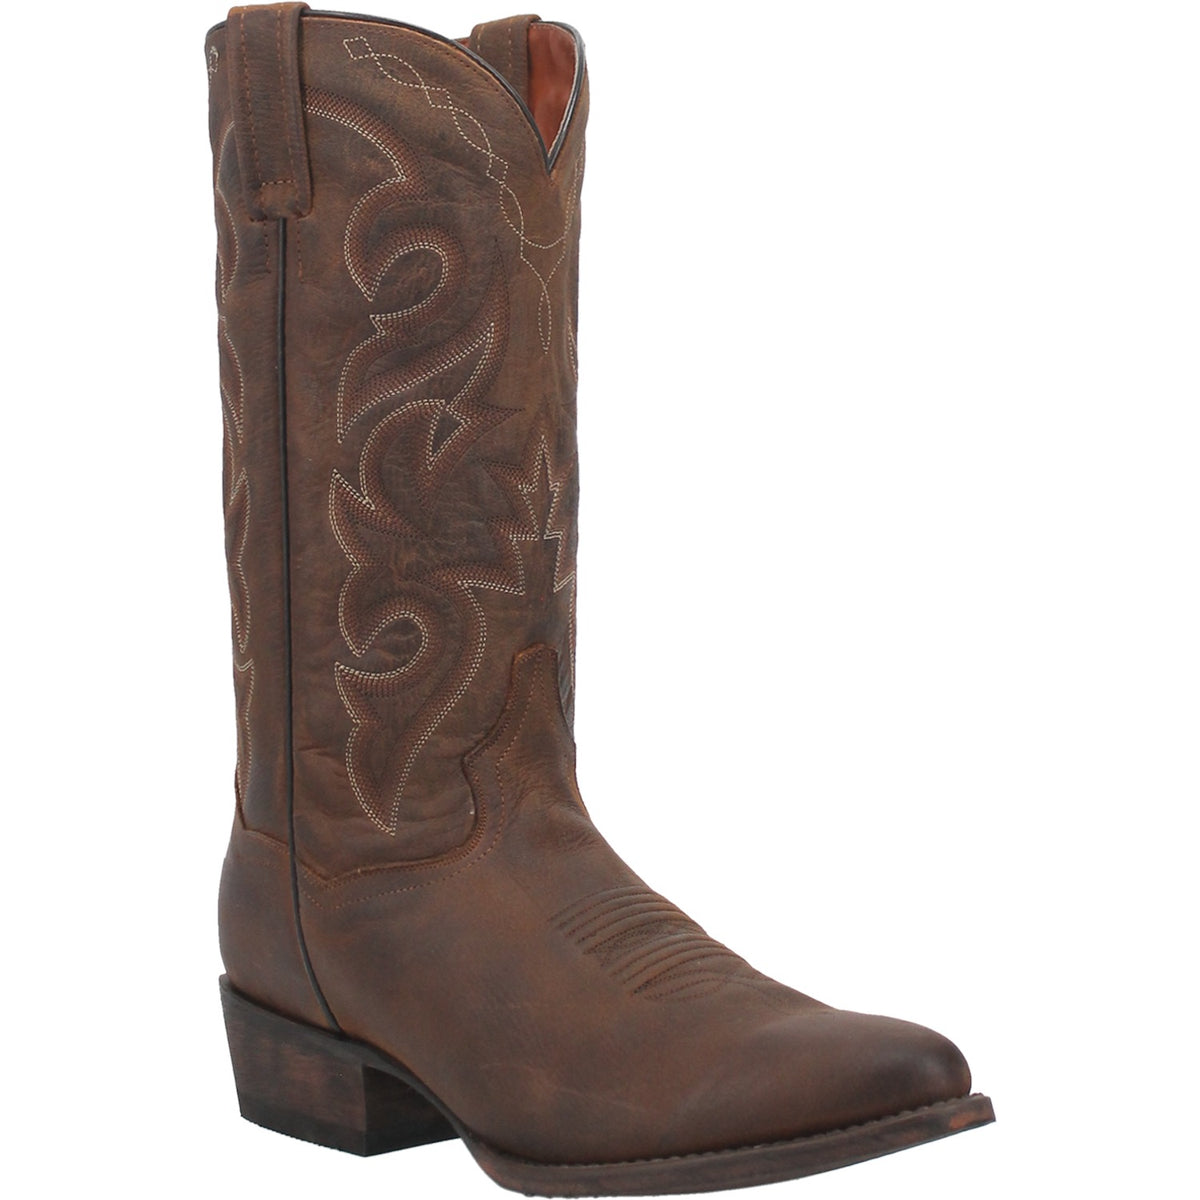 RENEGADE LEATHER BOOT Cover